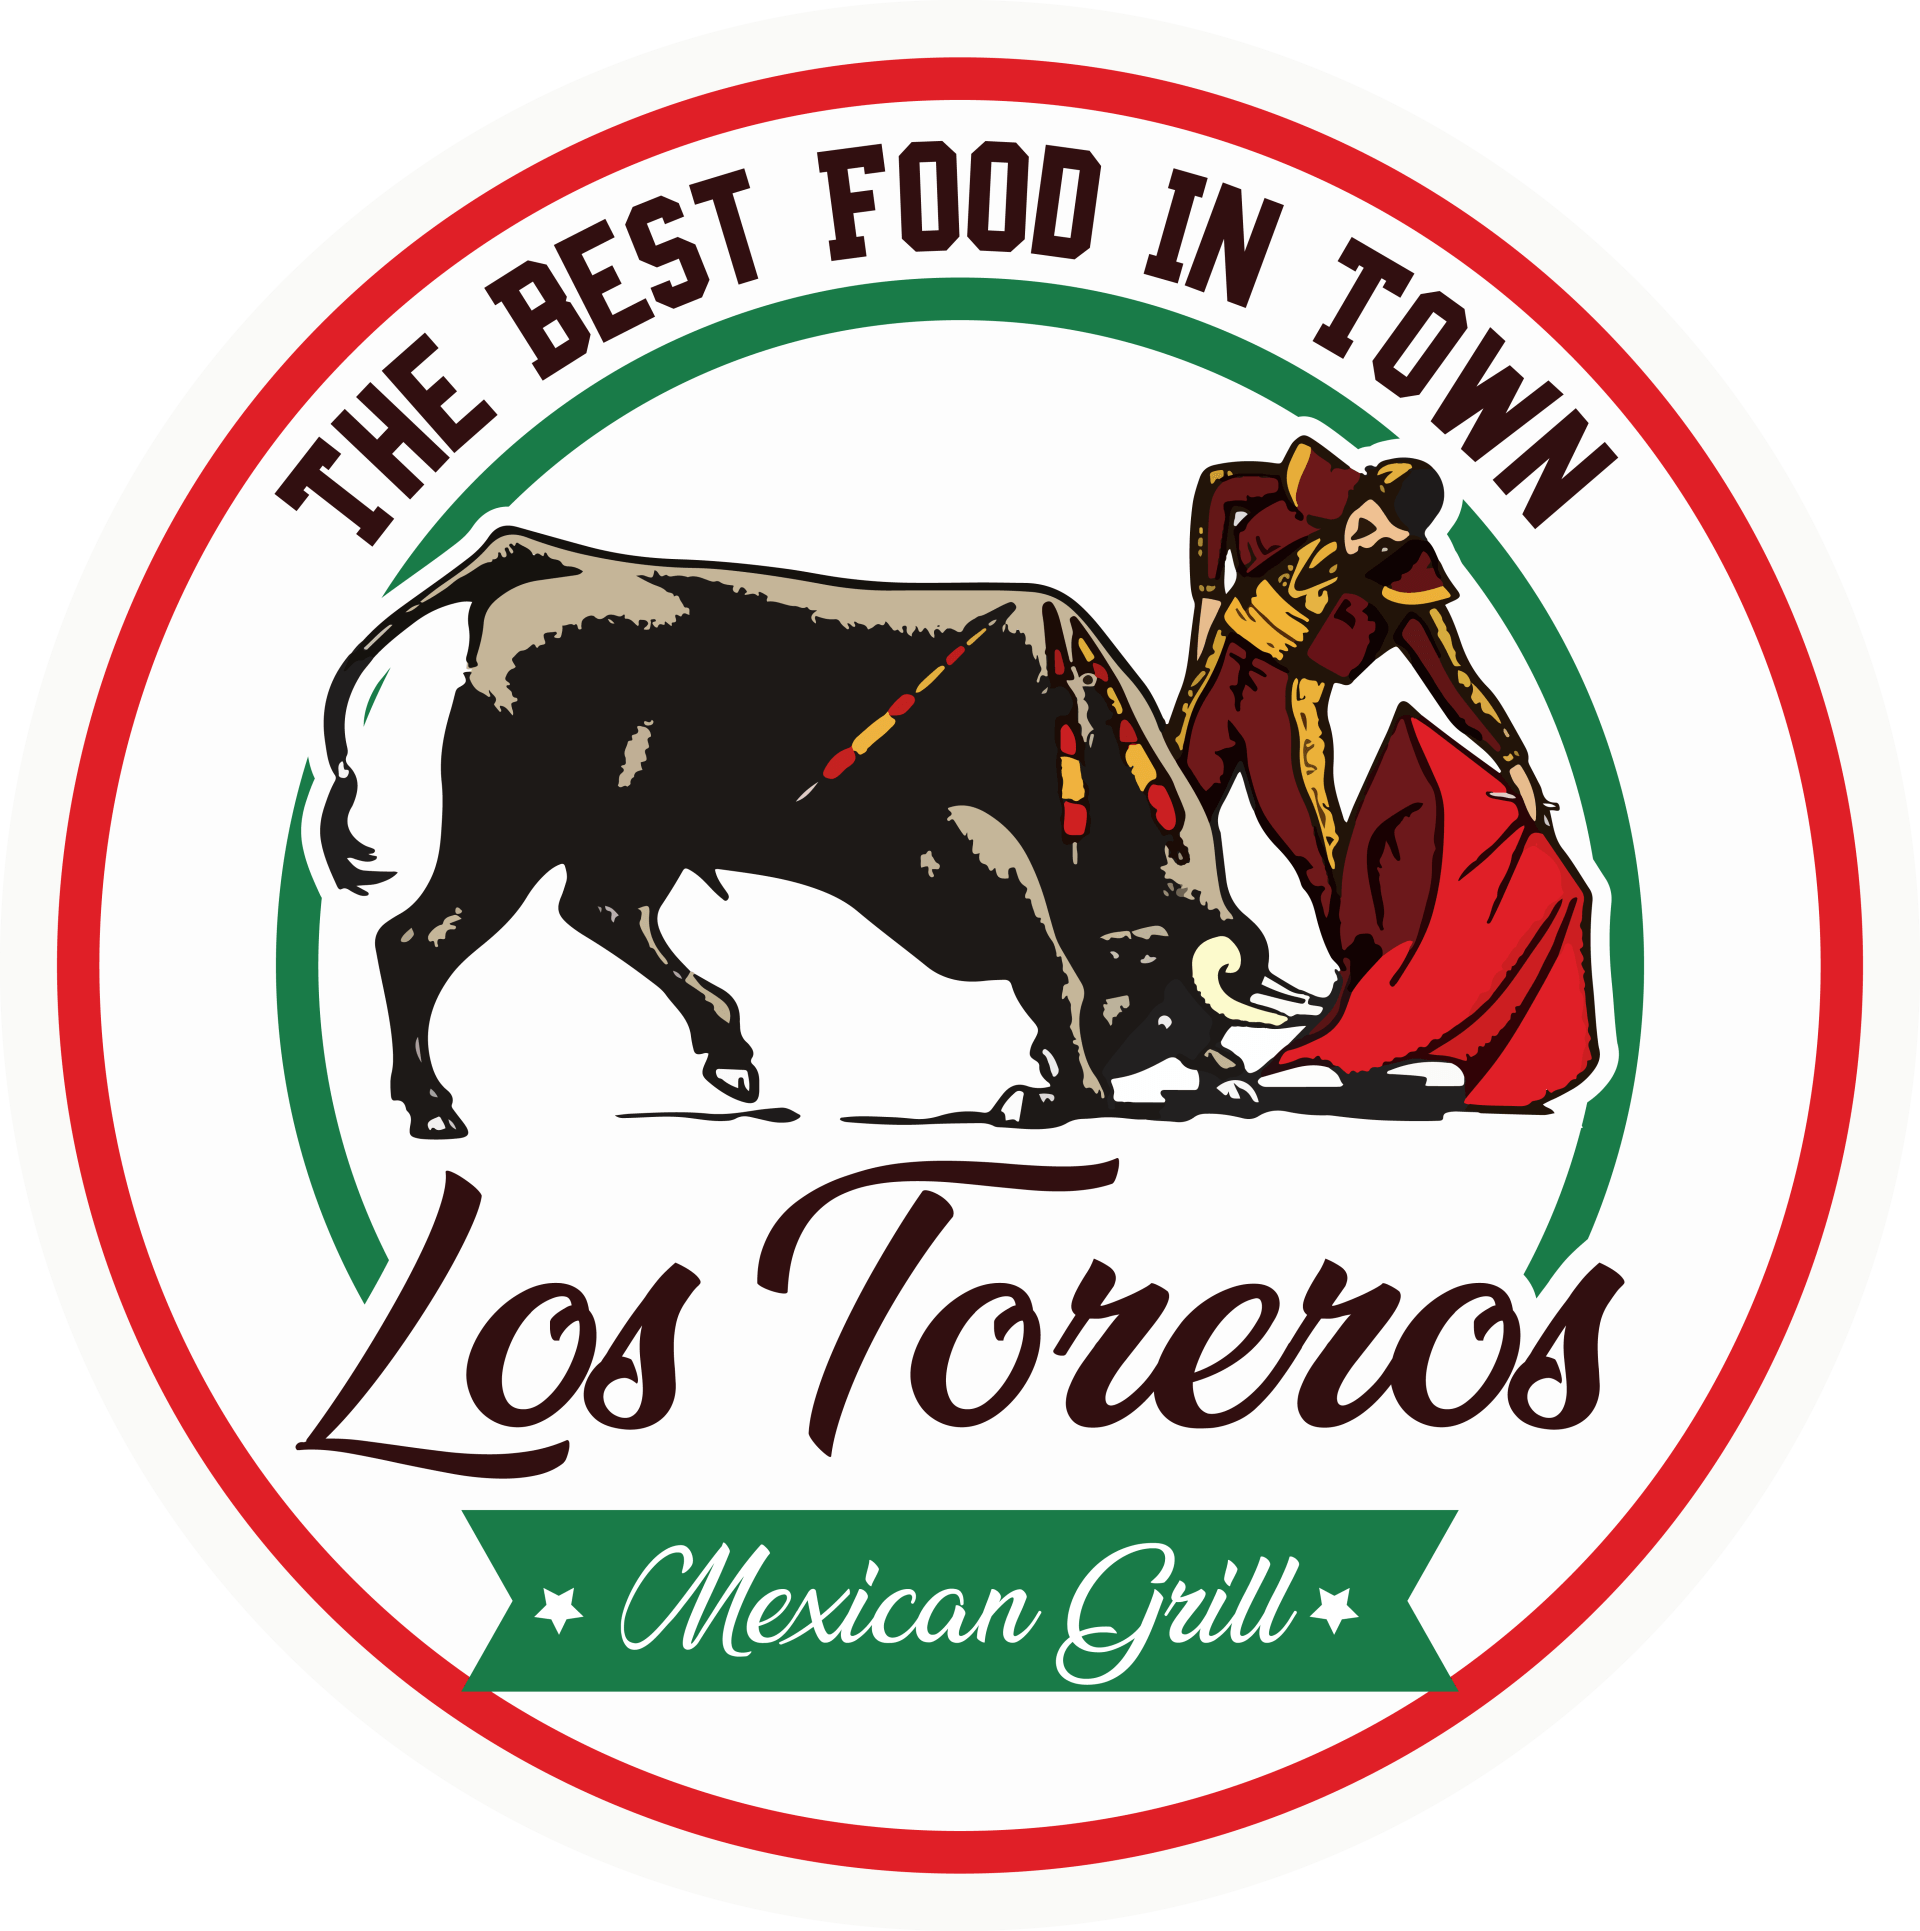 Los Toreros Mexican Grill - The Best Food In Town